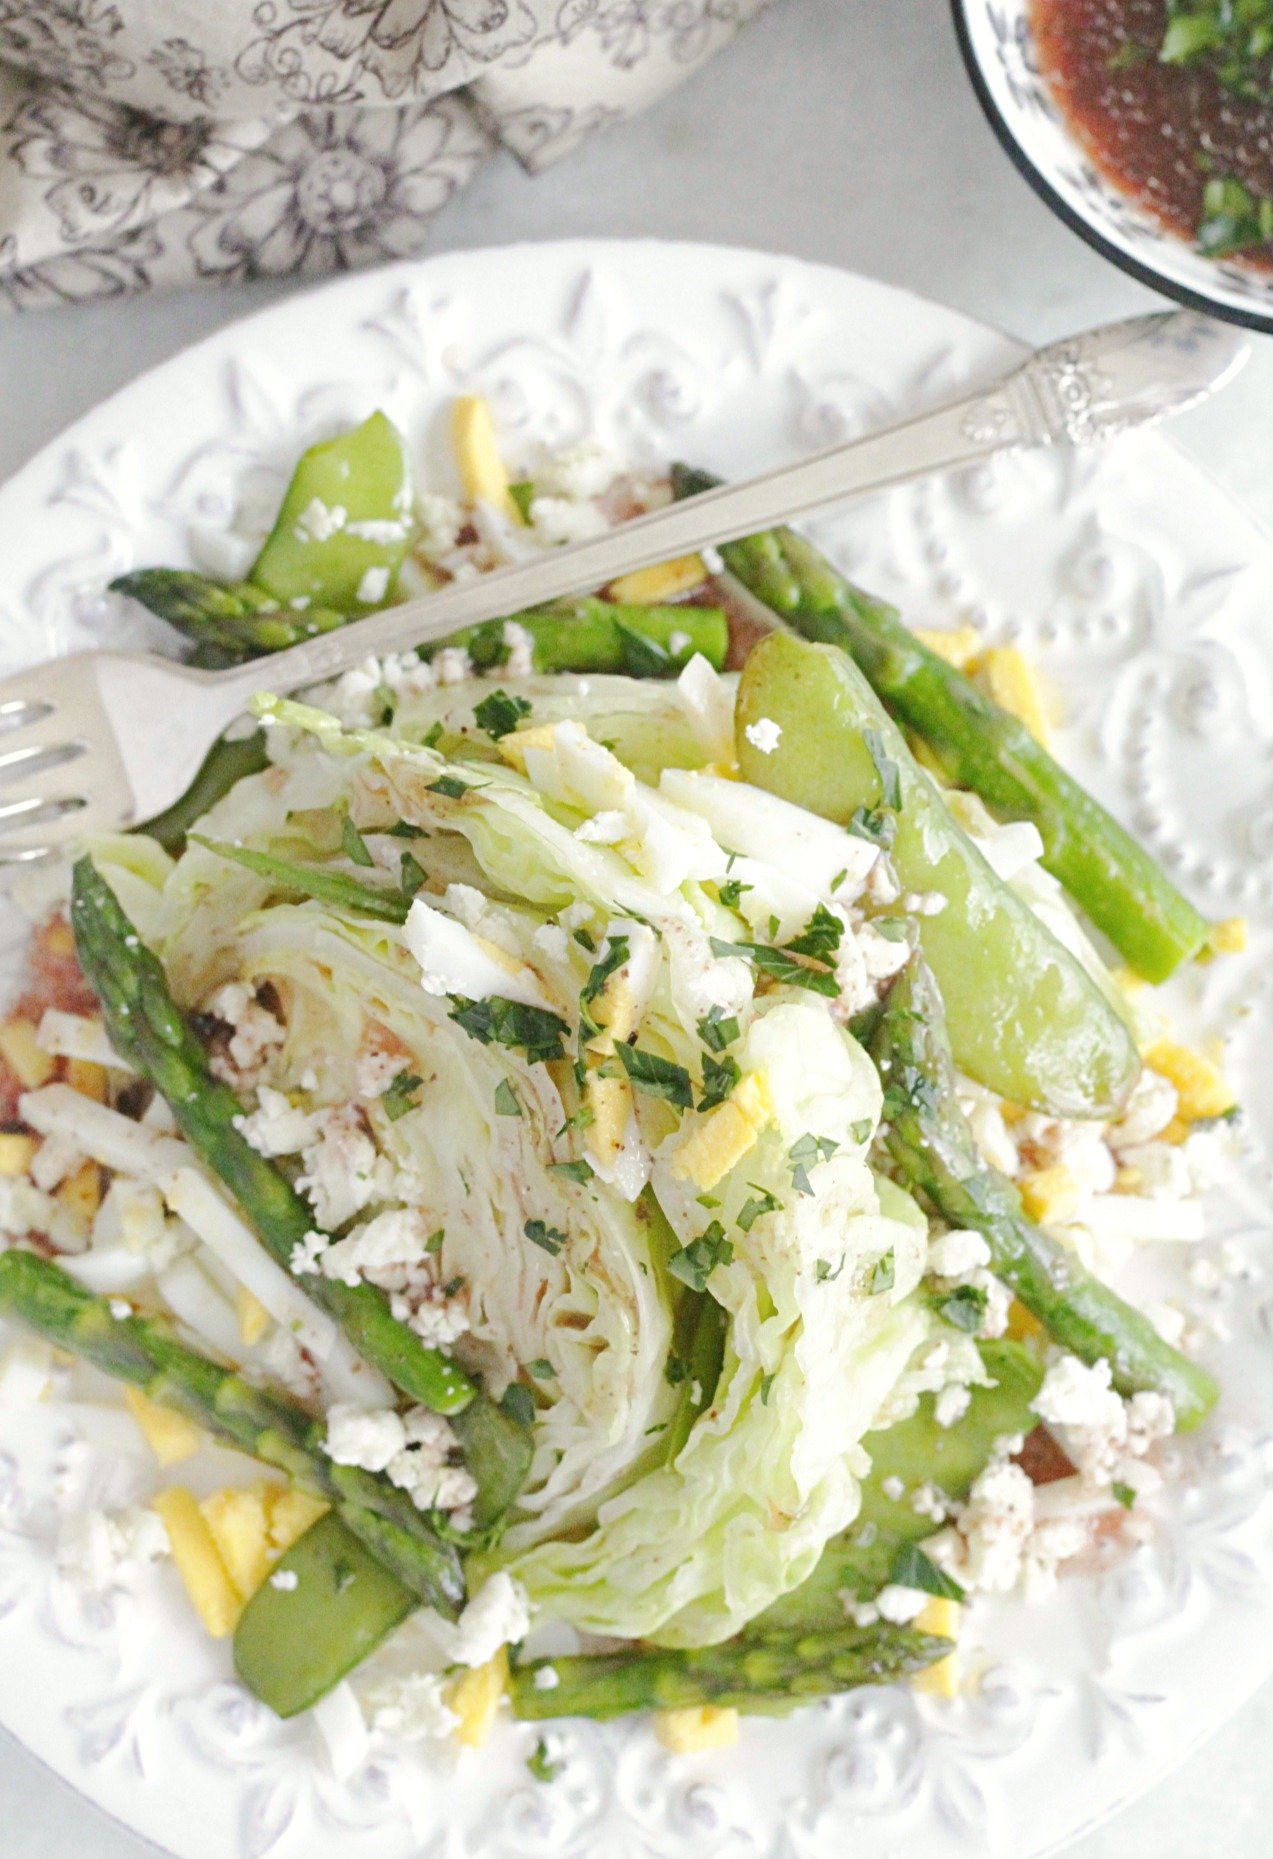 top view of spring wedge salad on plate with fork